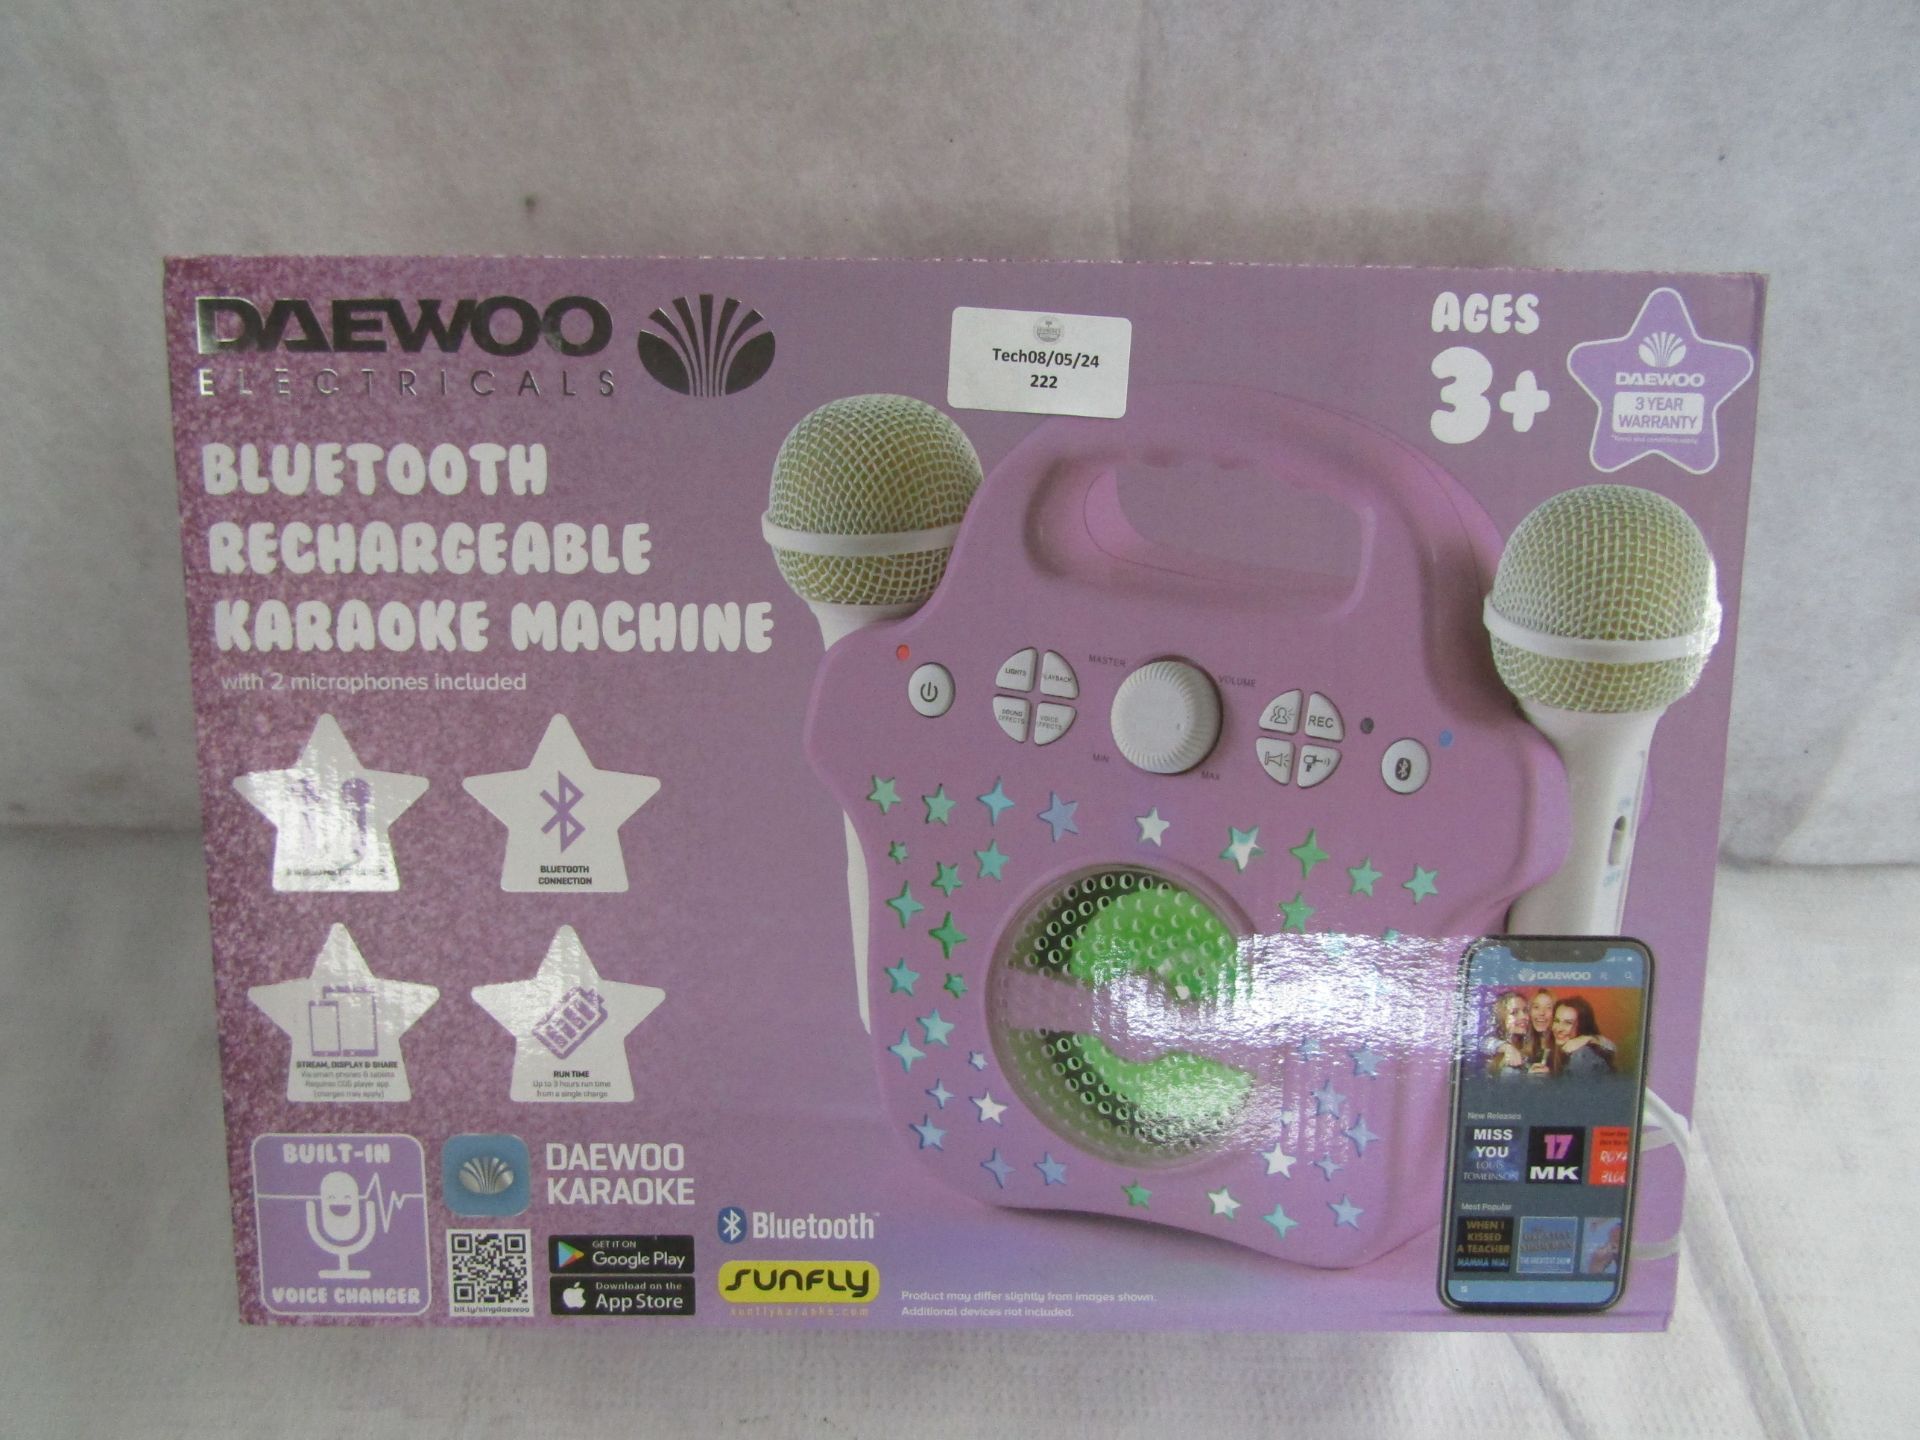 Daewoo Bluetooth Rechargeable Kareoke Machine, Unchecked & Boxed. RRP £48